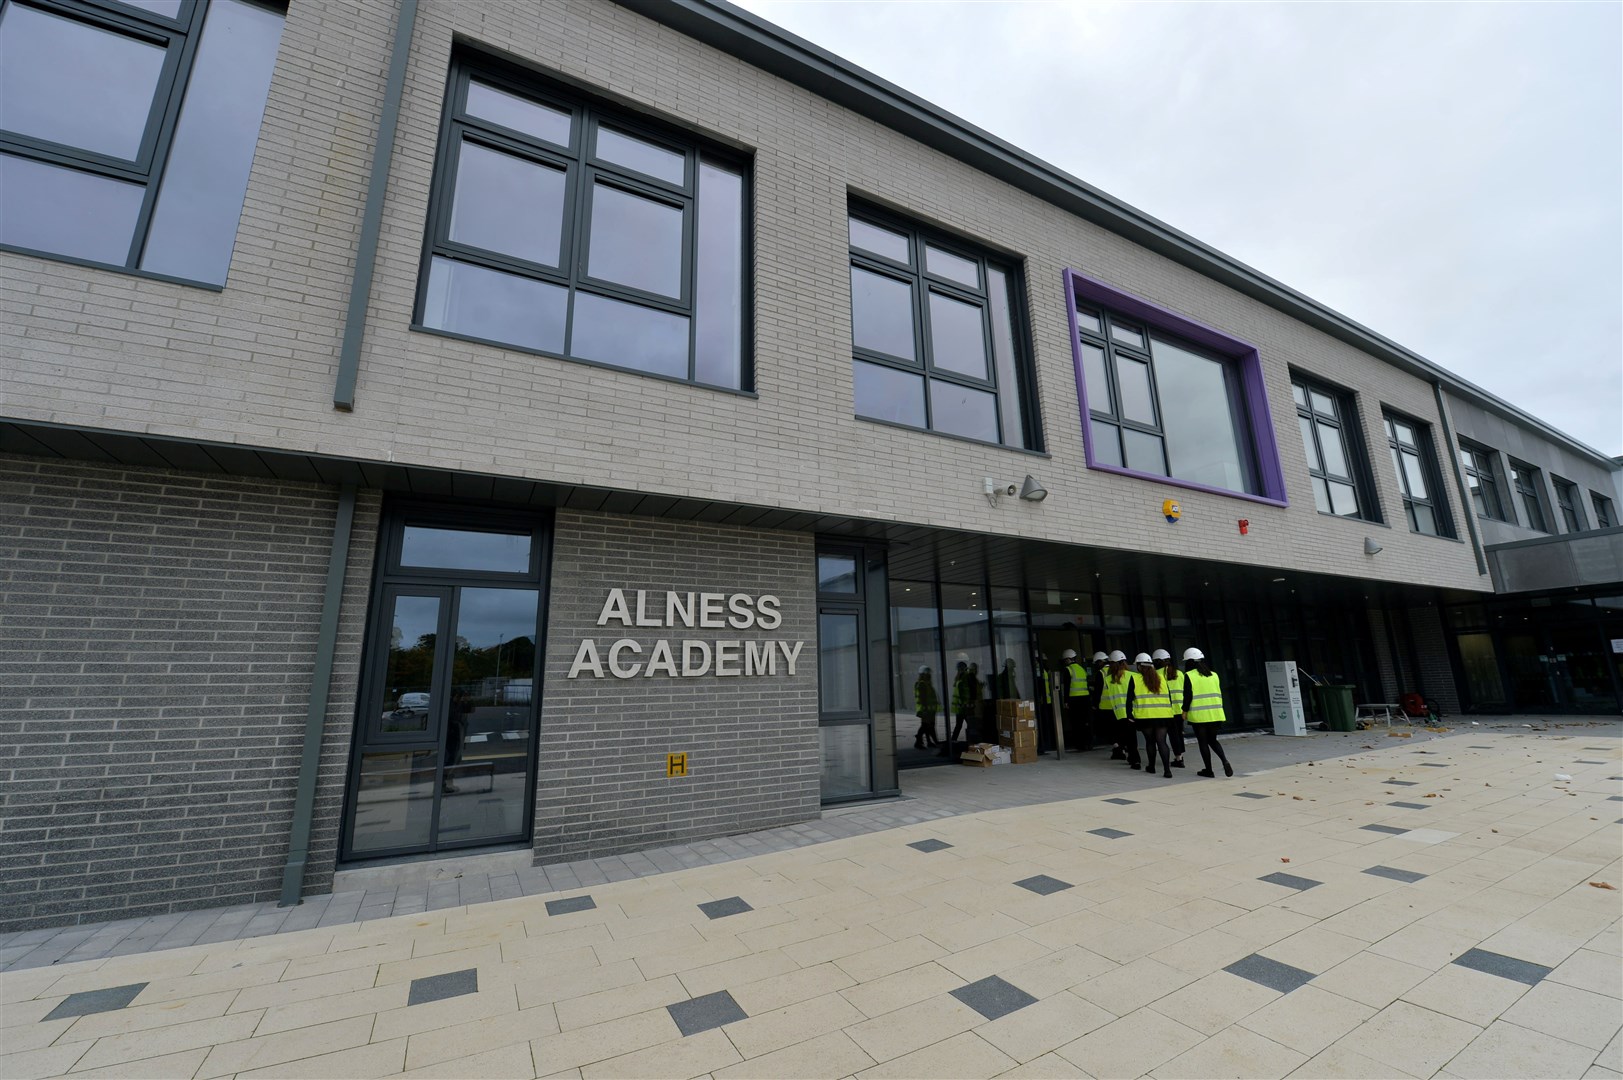 Alness Academy, now in new buildings, is looking ahead to the next academic term with its repurposed raffle.